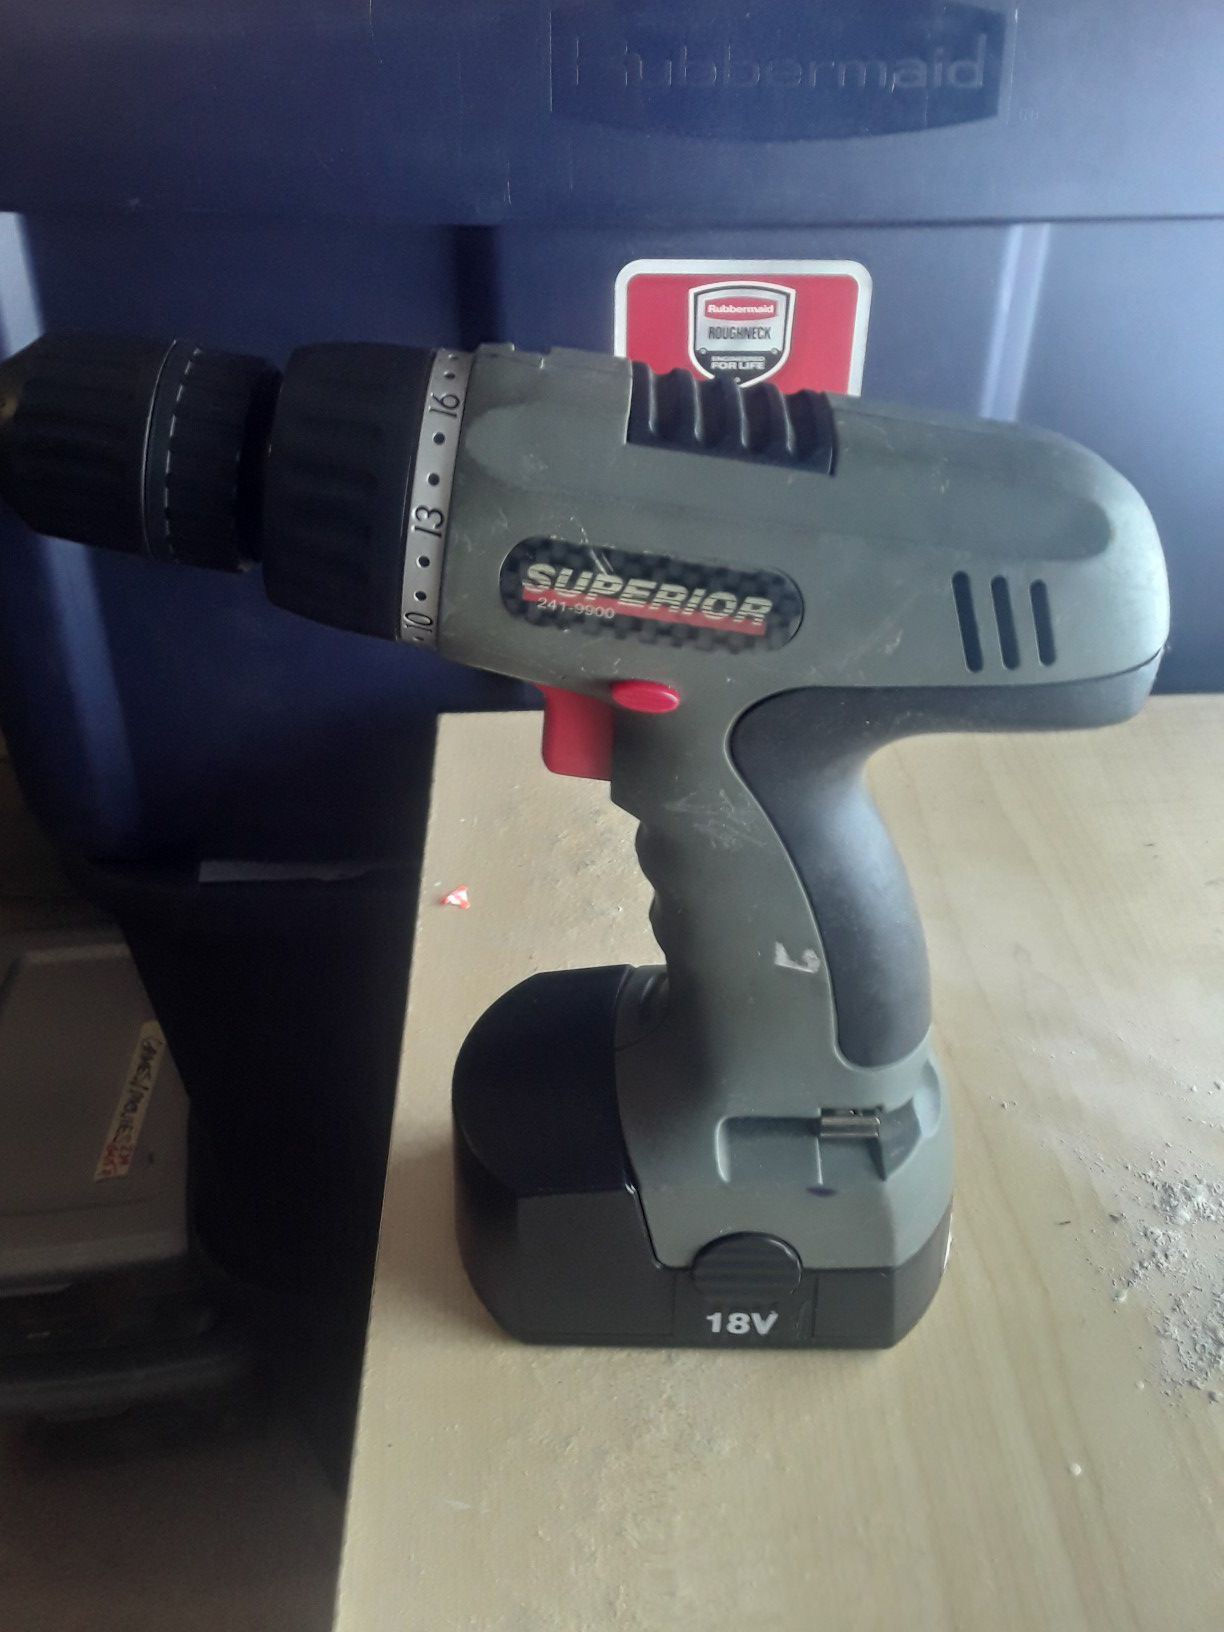 3 cordless drills working no chargers